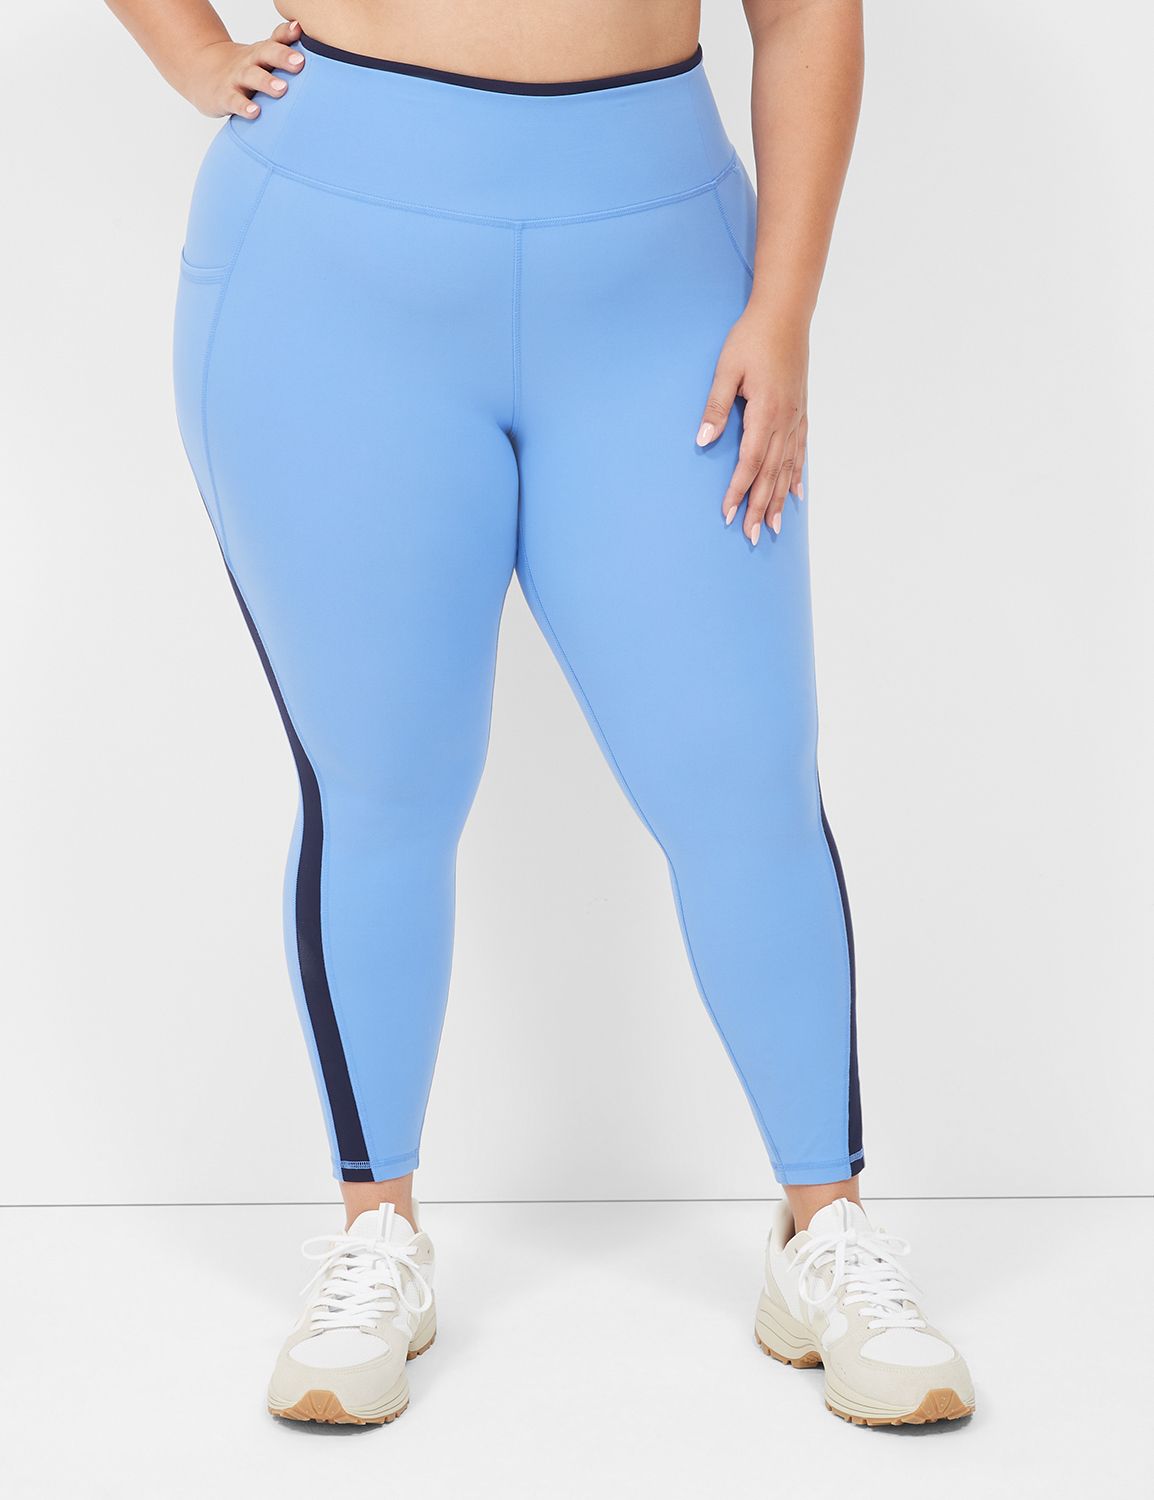 Leggings ACTIVE LIFE from 9.00 € - Discounts up to 69%